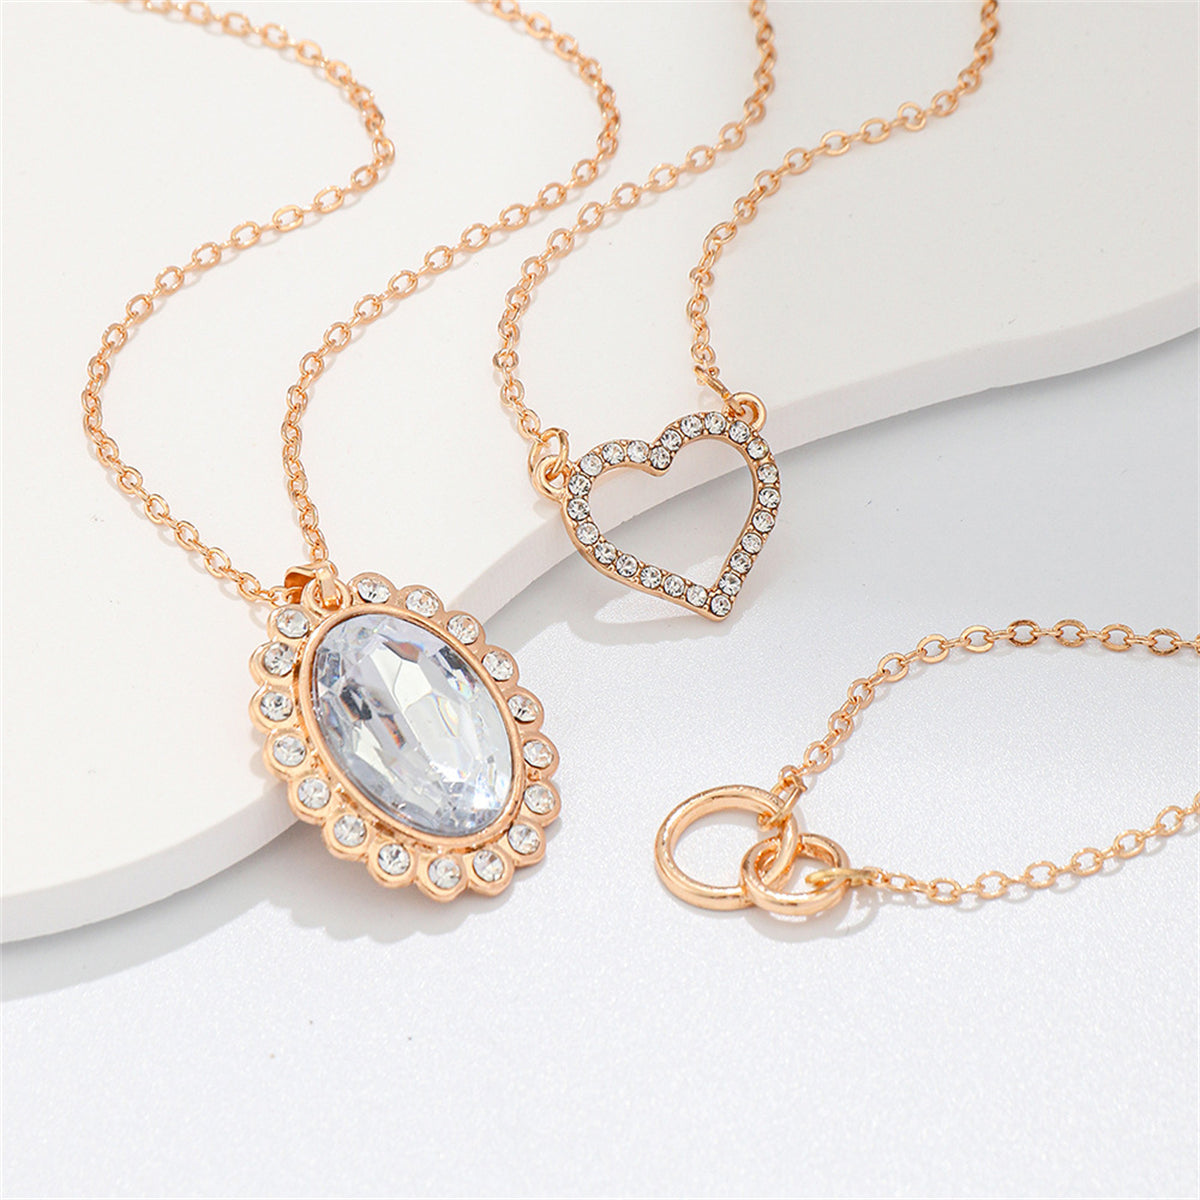 Clear Crystal & Cubic Zirconia 18K Gold-Plated Oval Pendant Necklace Set